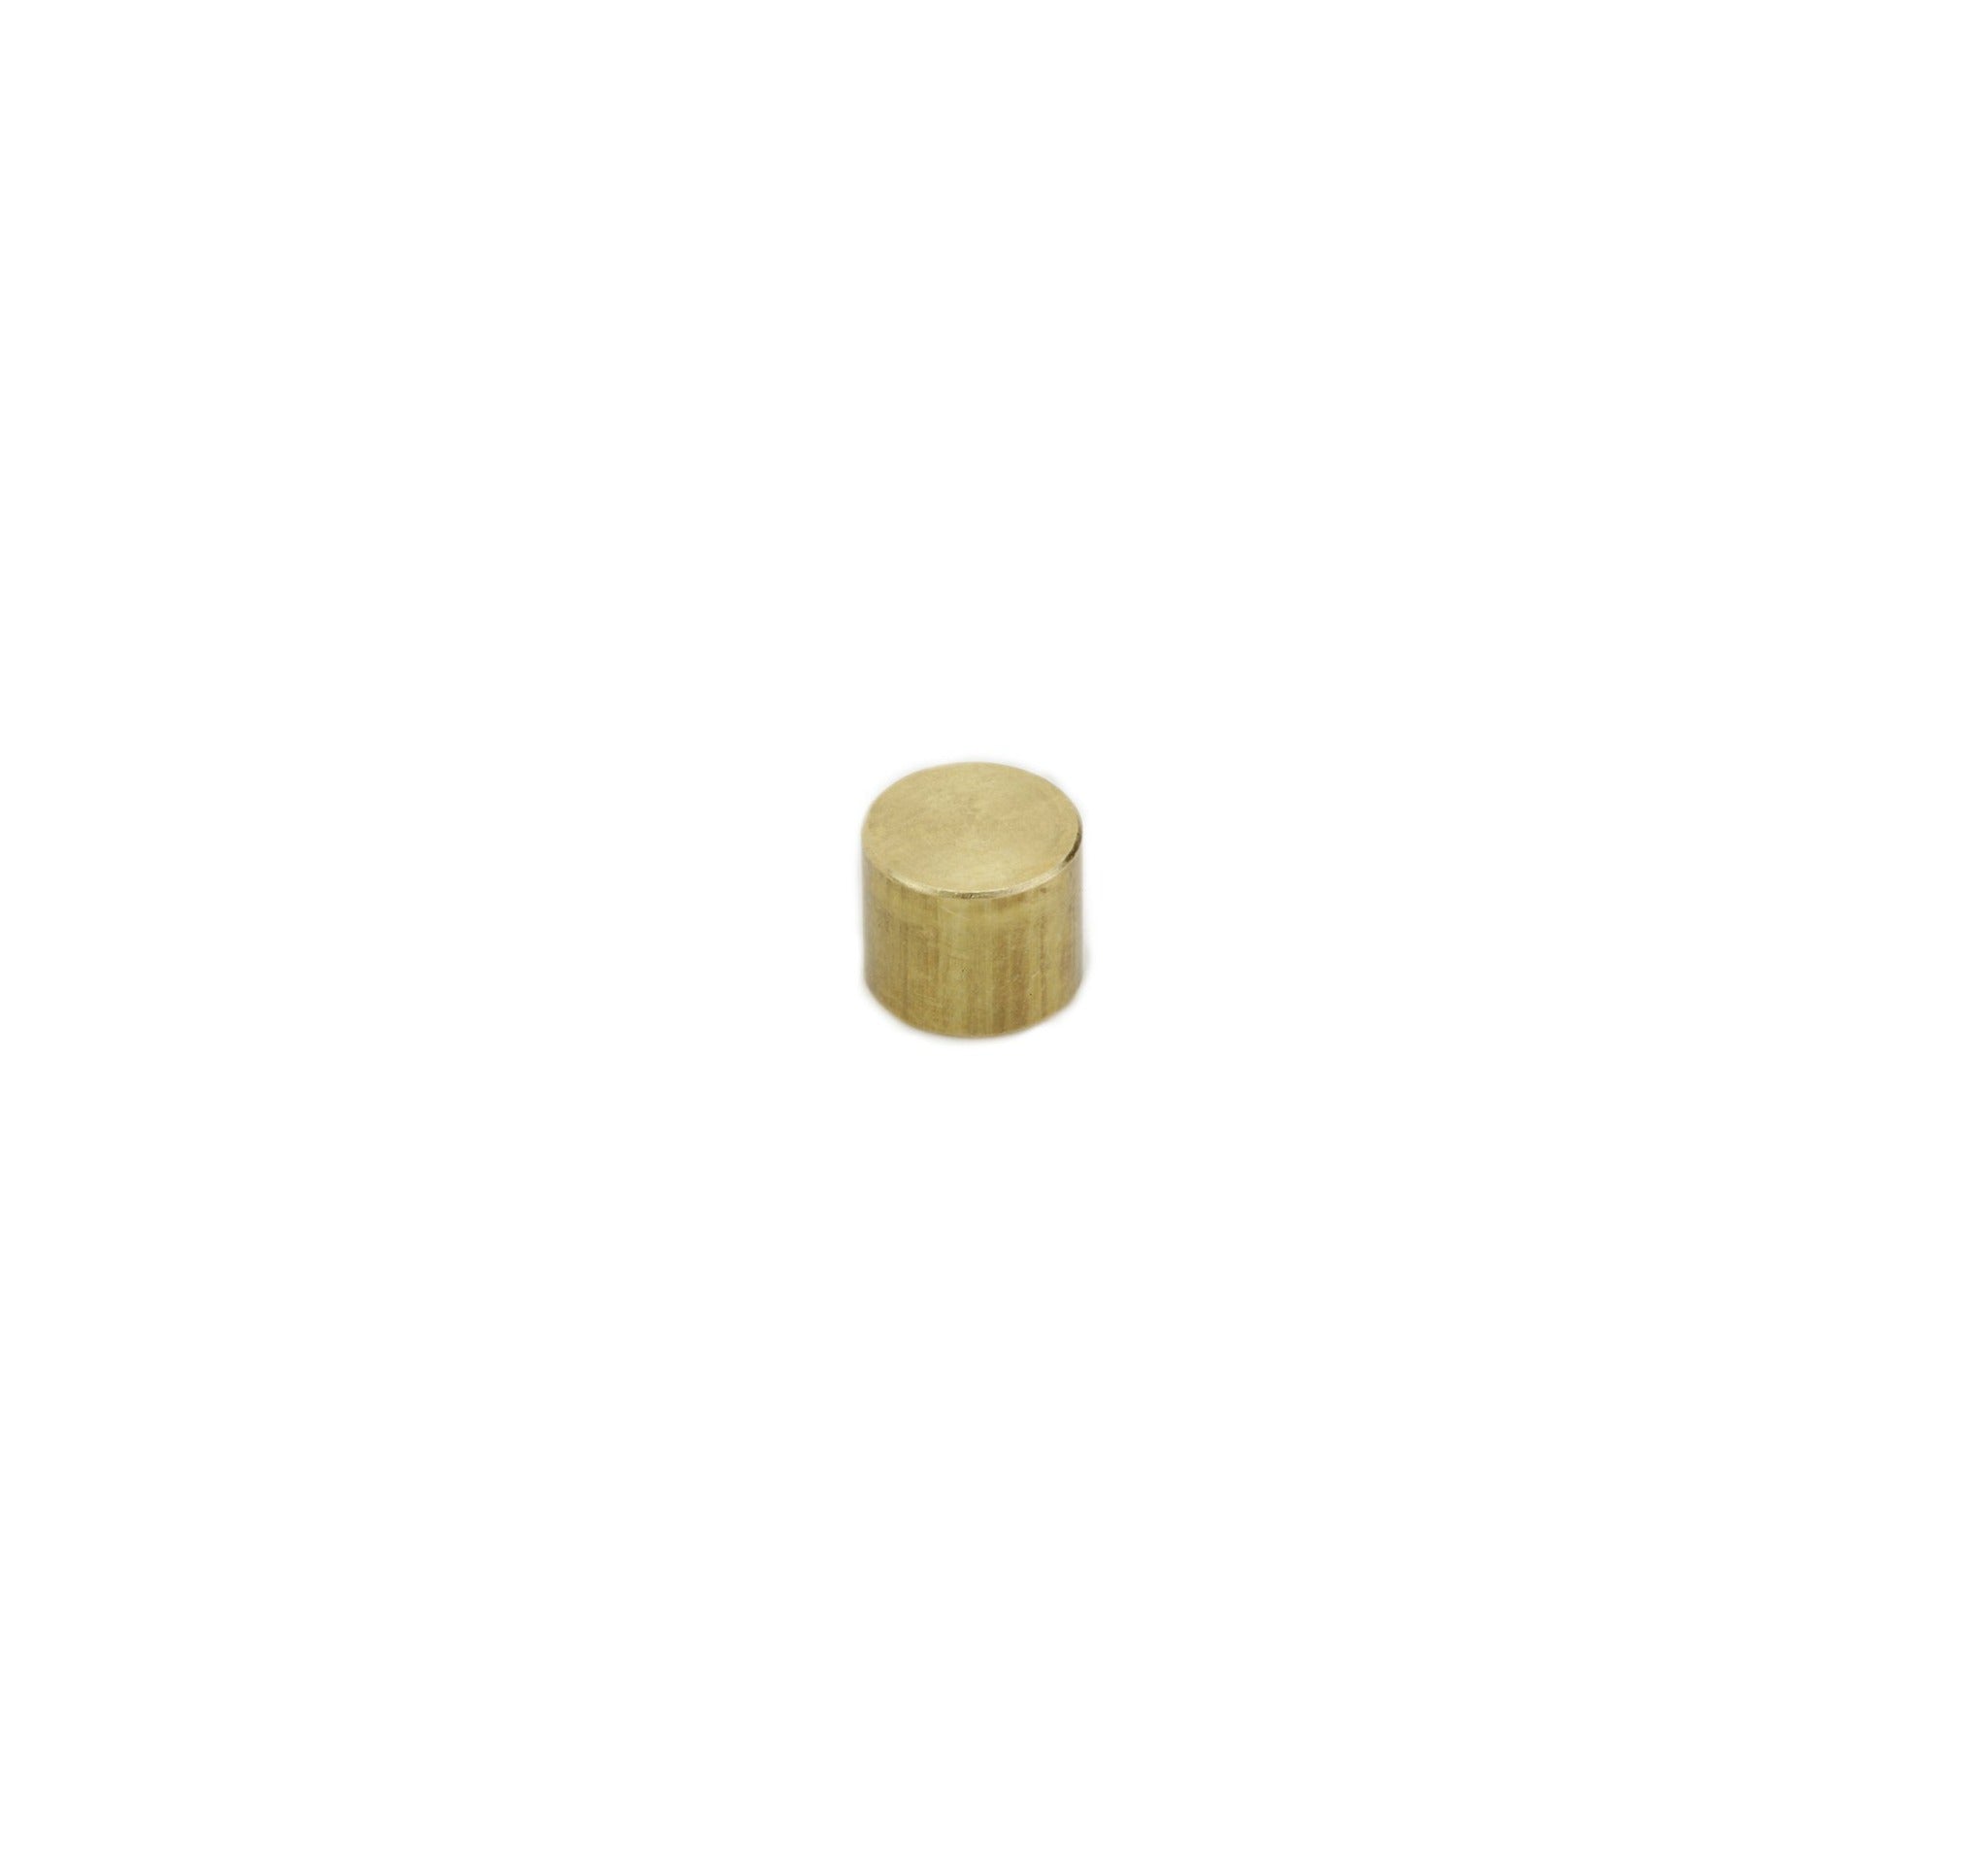 Ammco 3142 5/16" Brass Plug Replacement (Pack of 10)